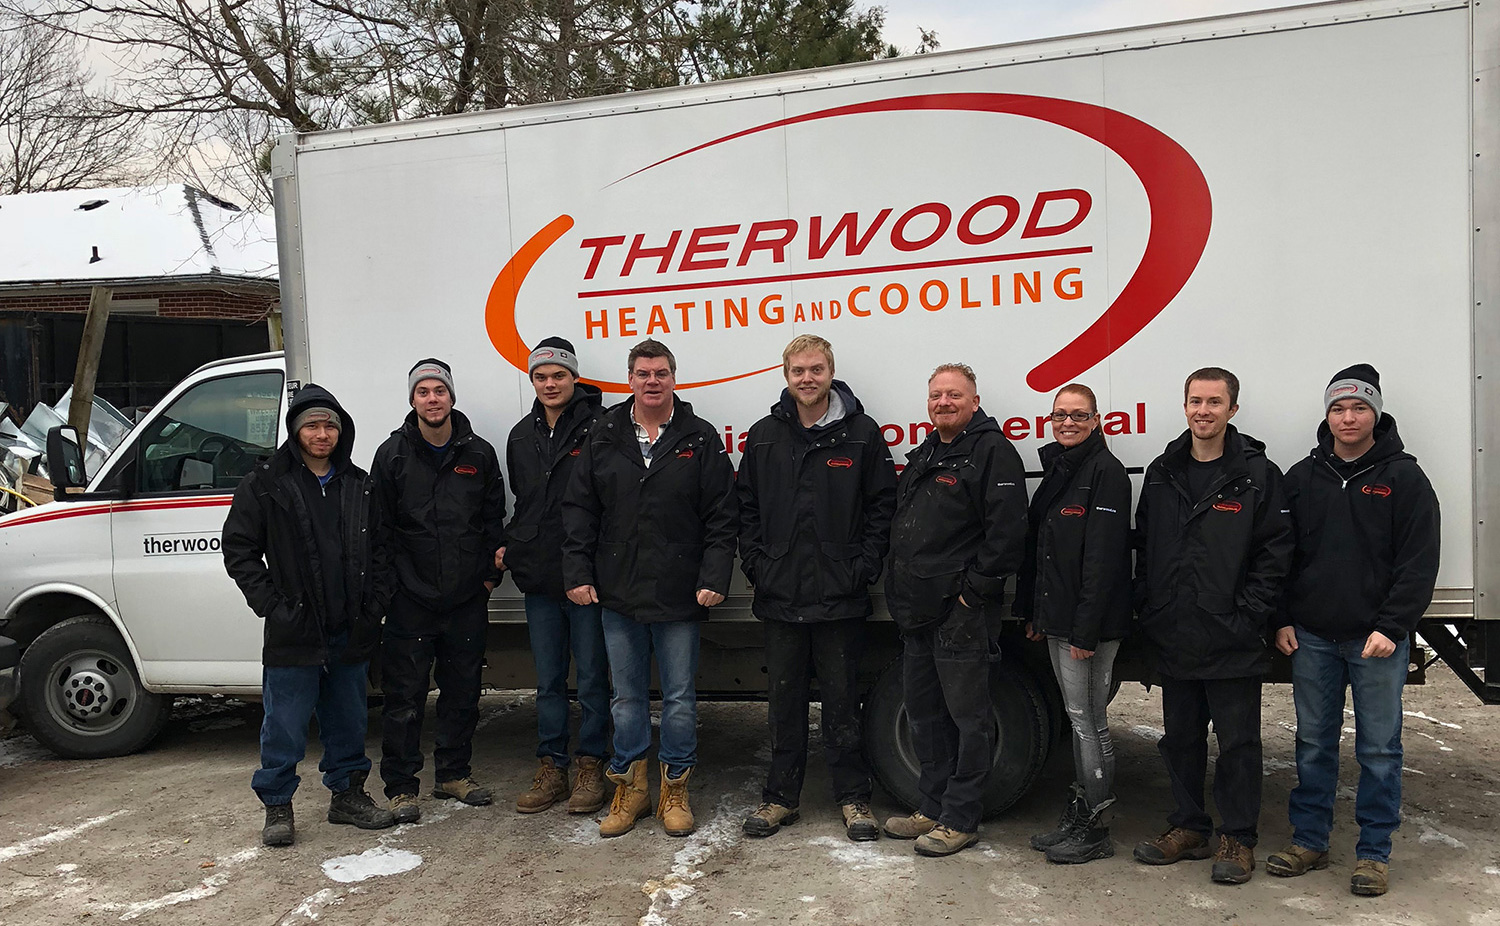 about-therwood-heating-and-cooling